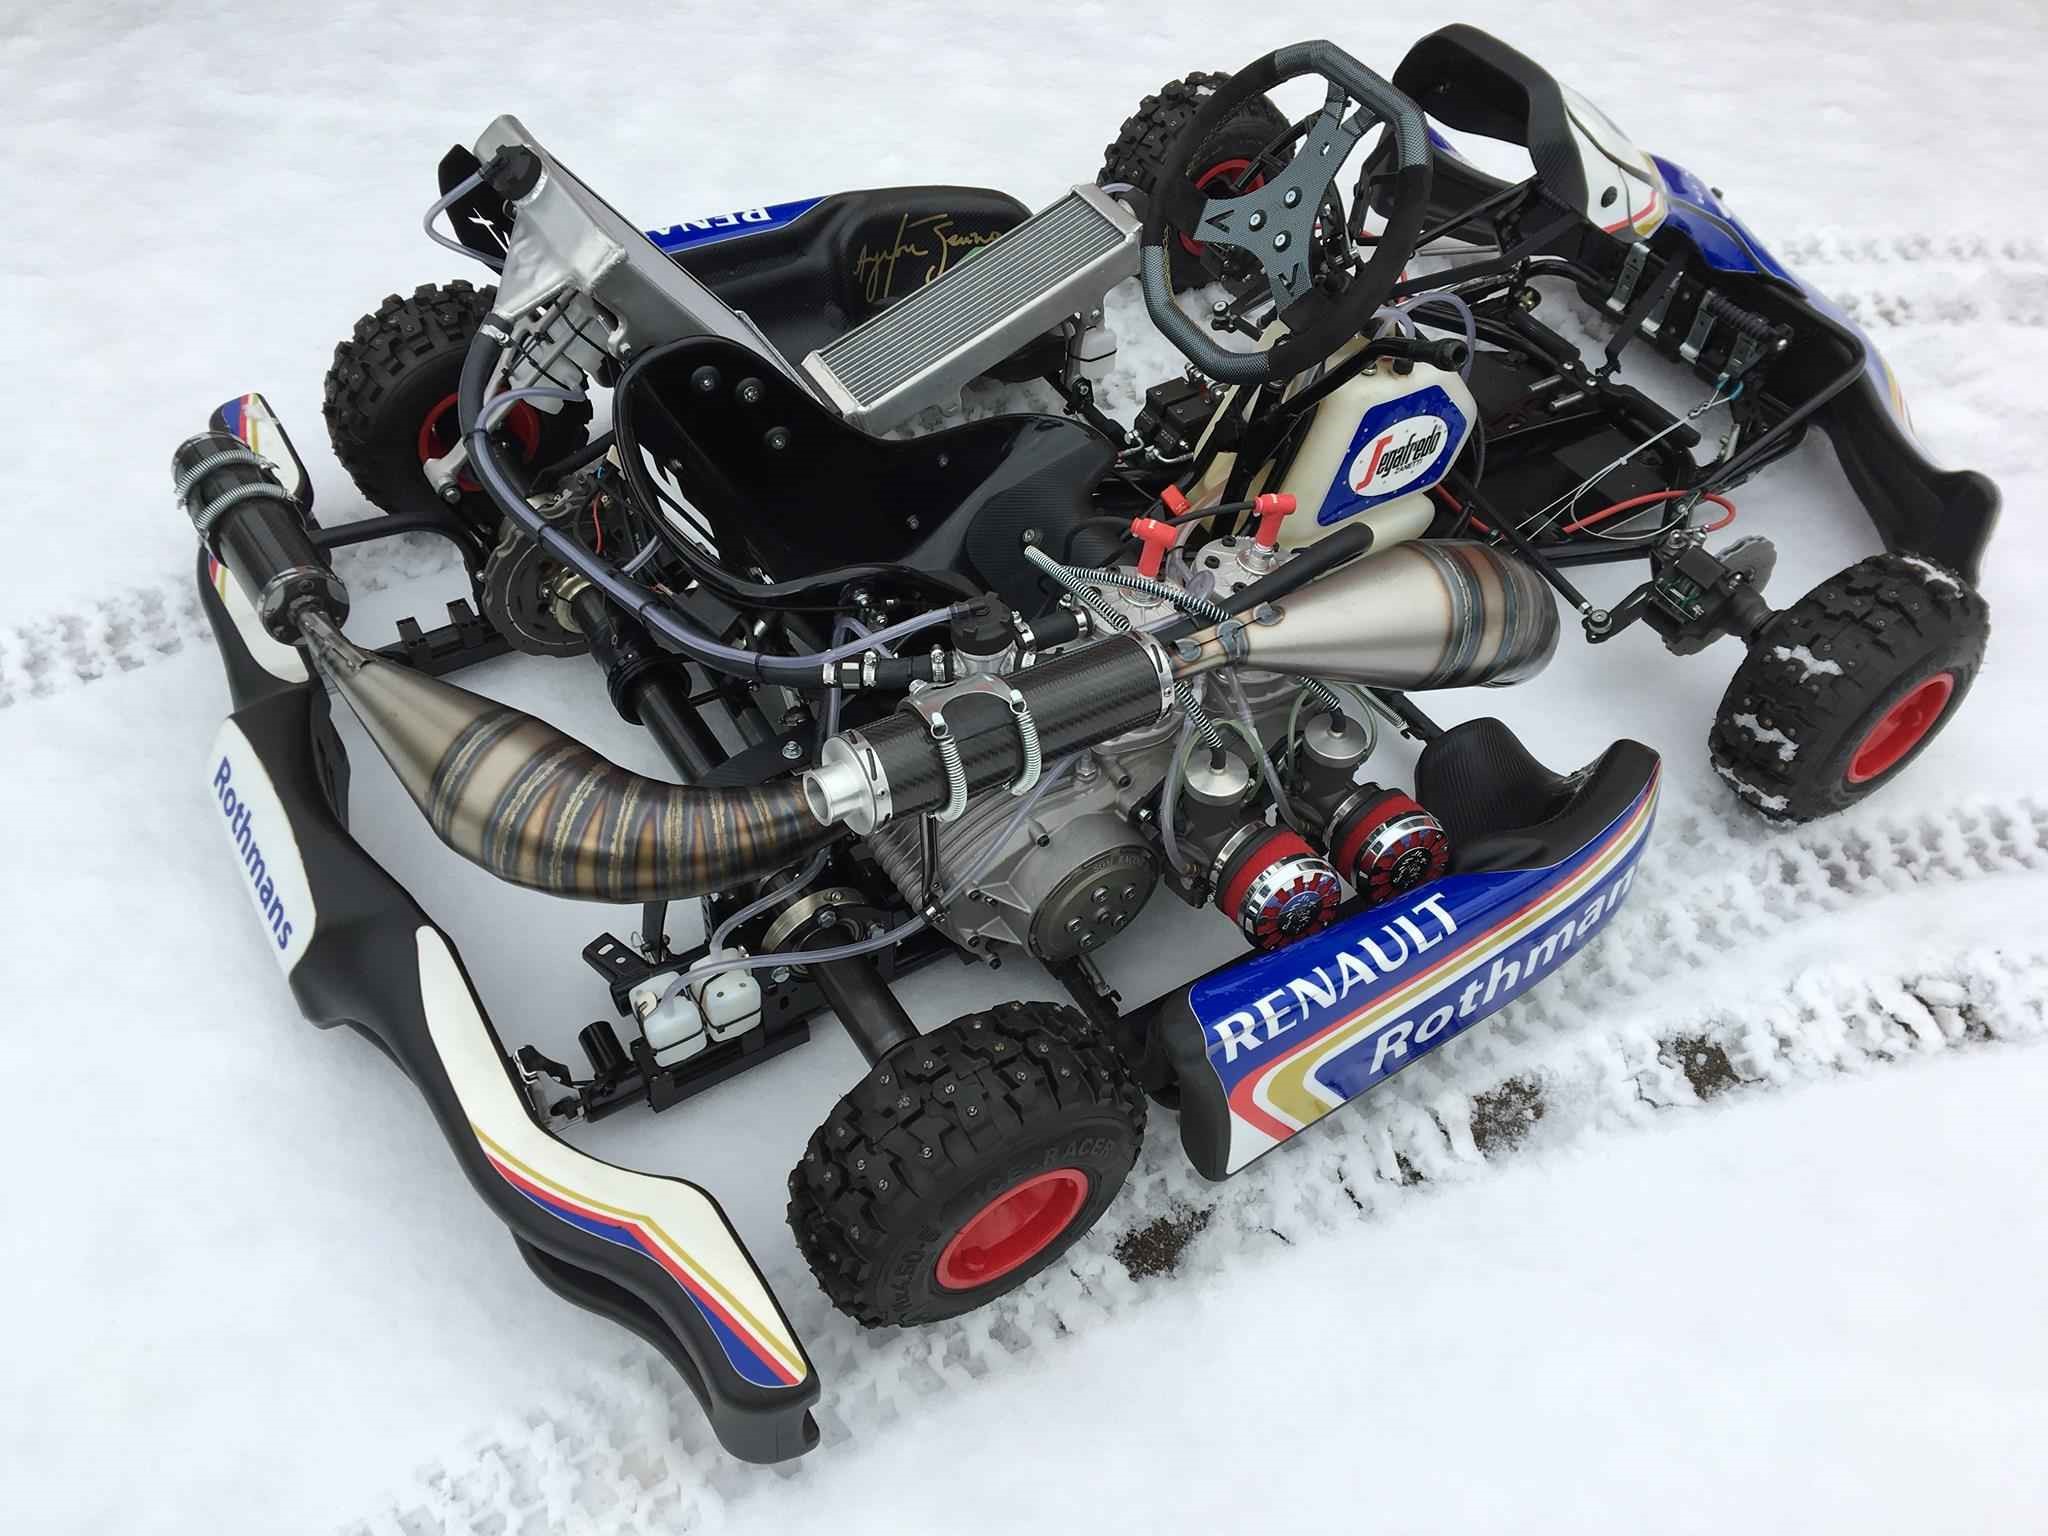 SGM’s 100HP Ice Racing kart in Williams F1 Renault livery.